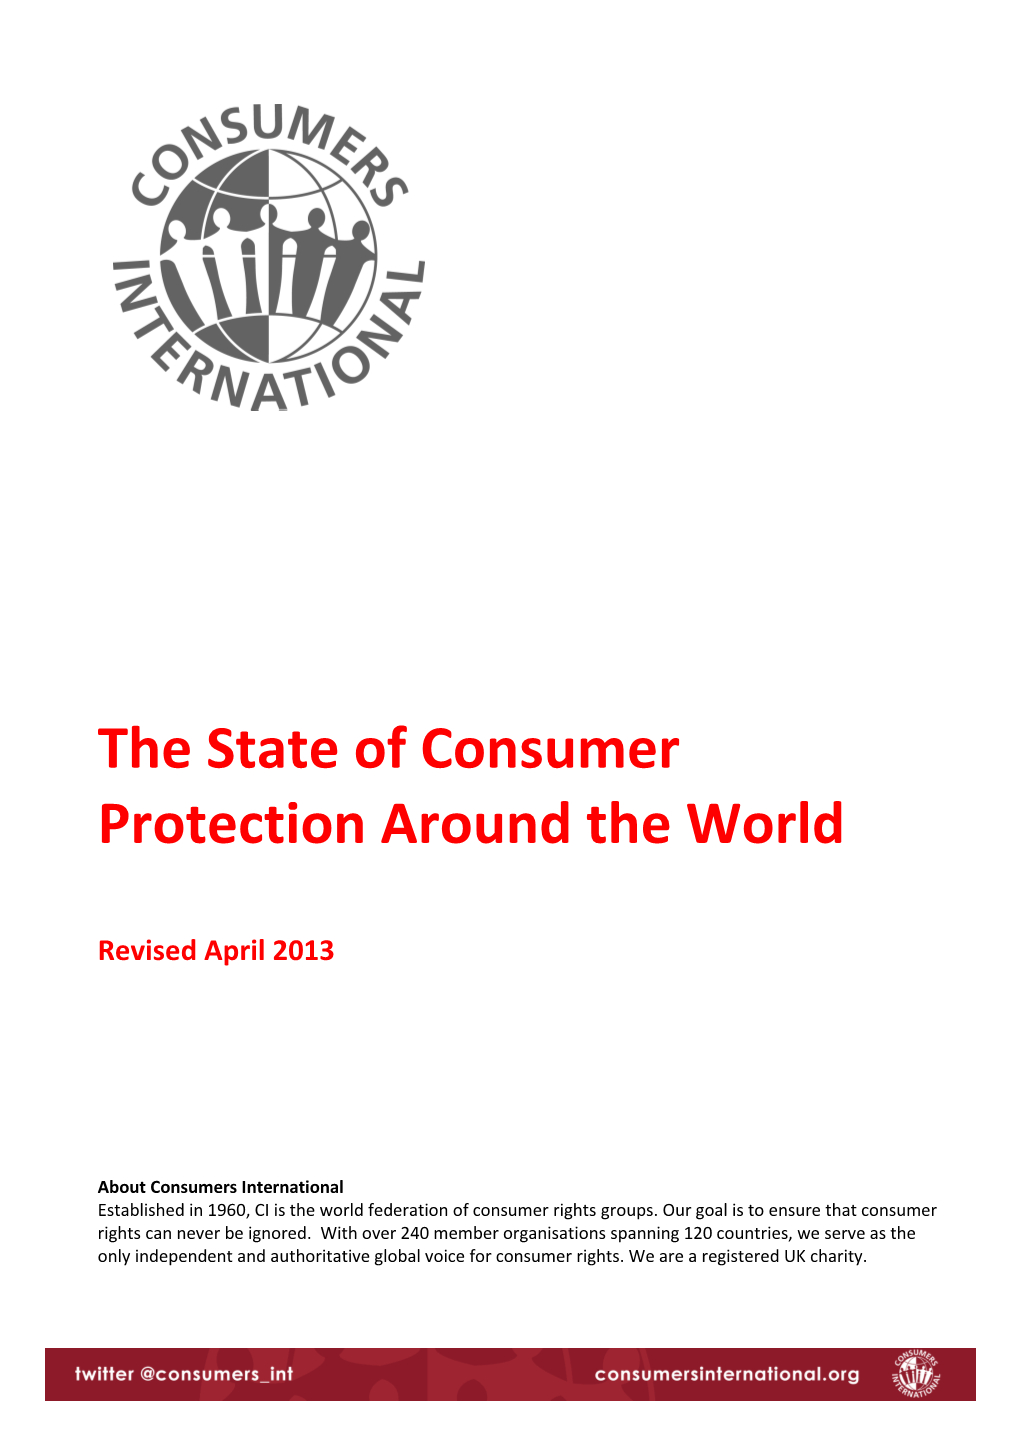 The State of Consumer Protection Around the World